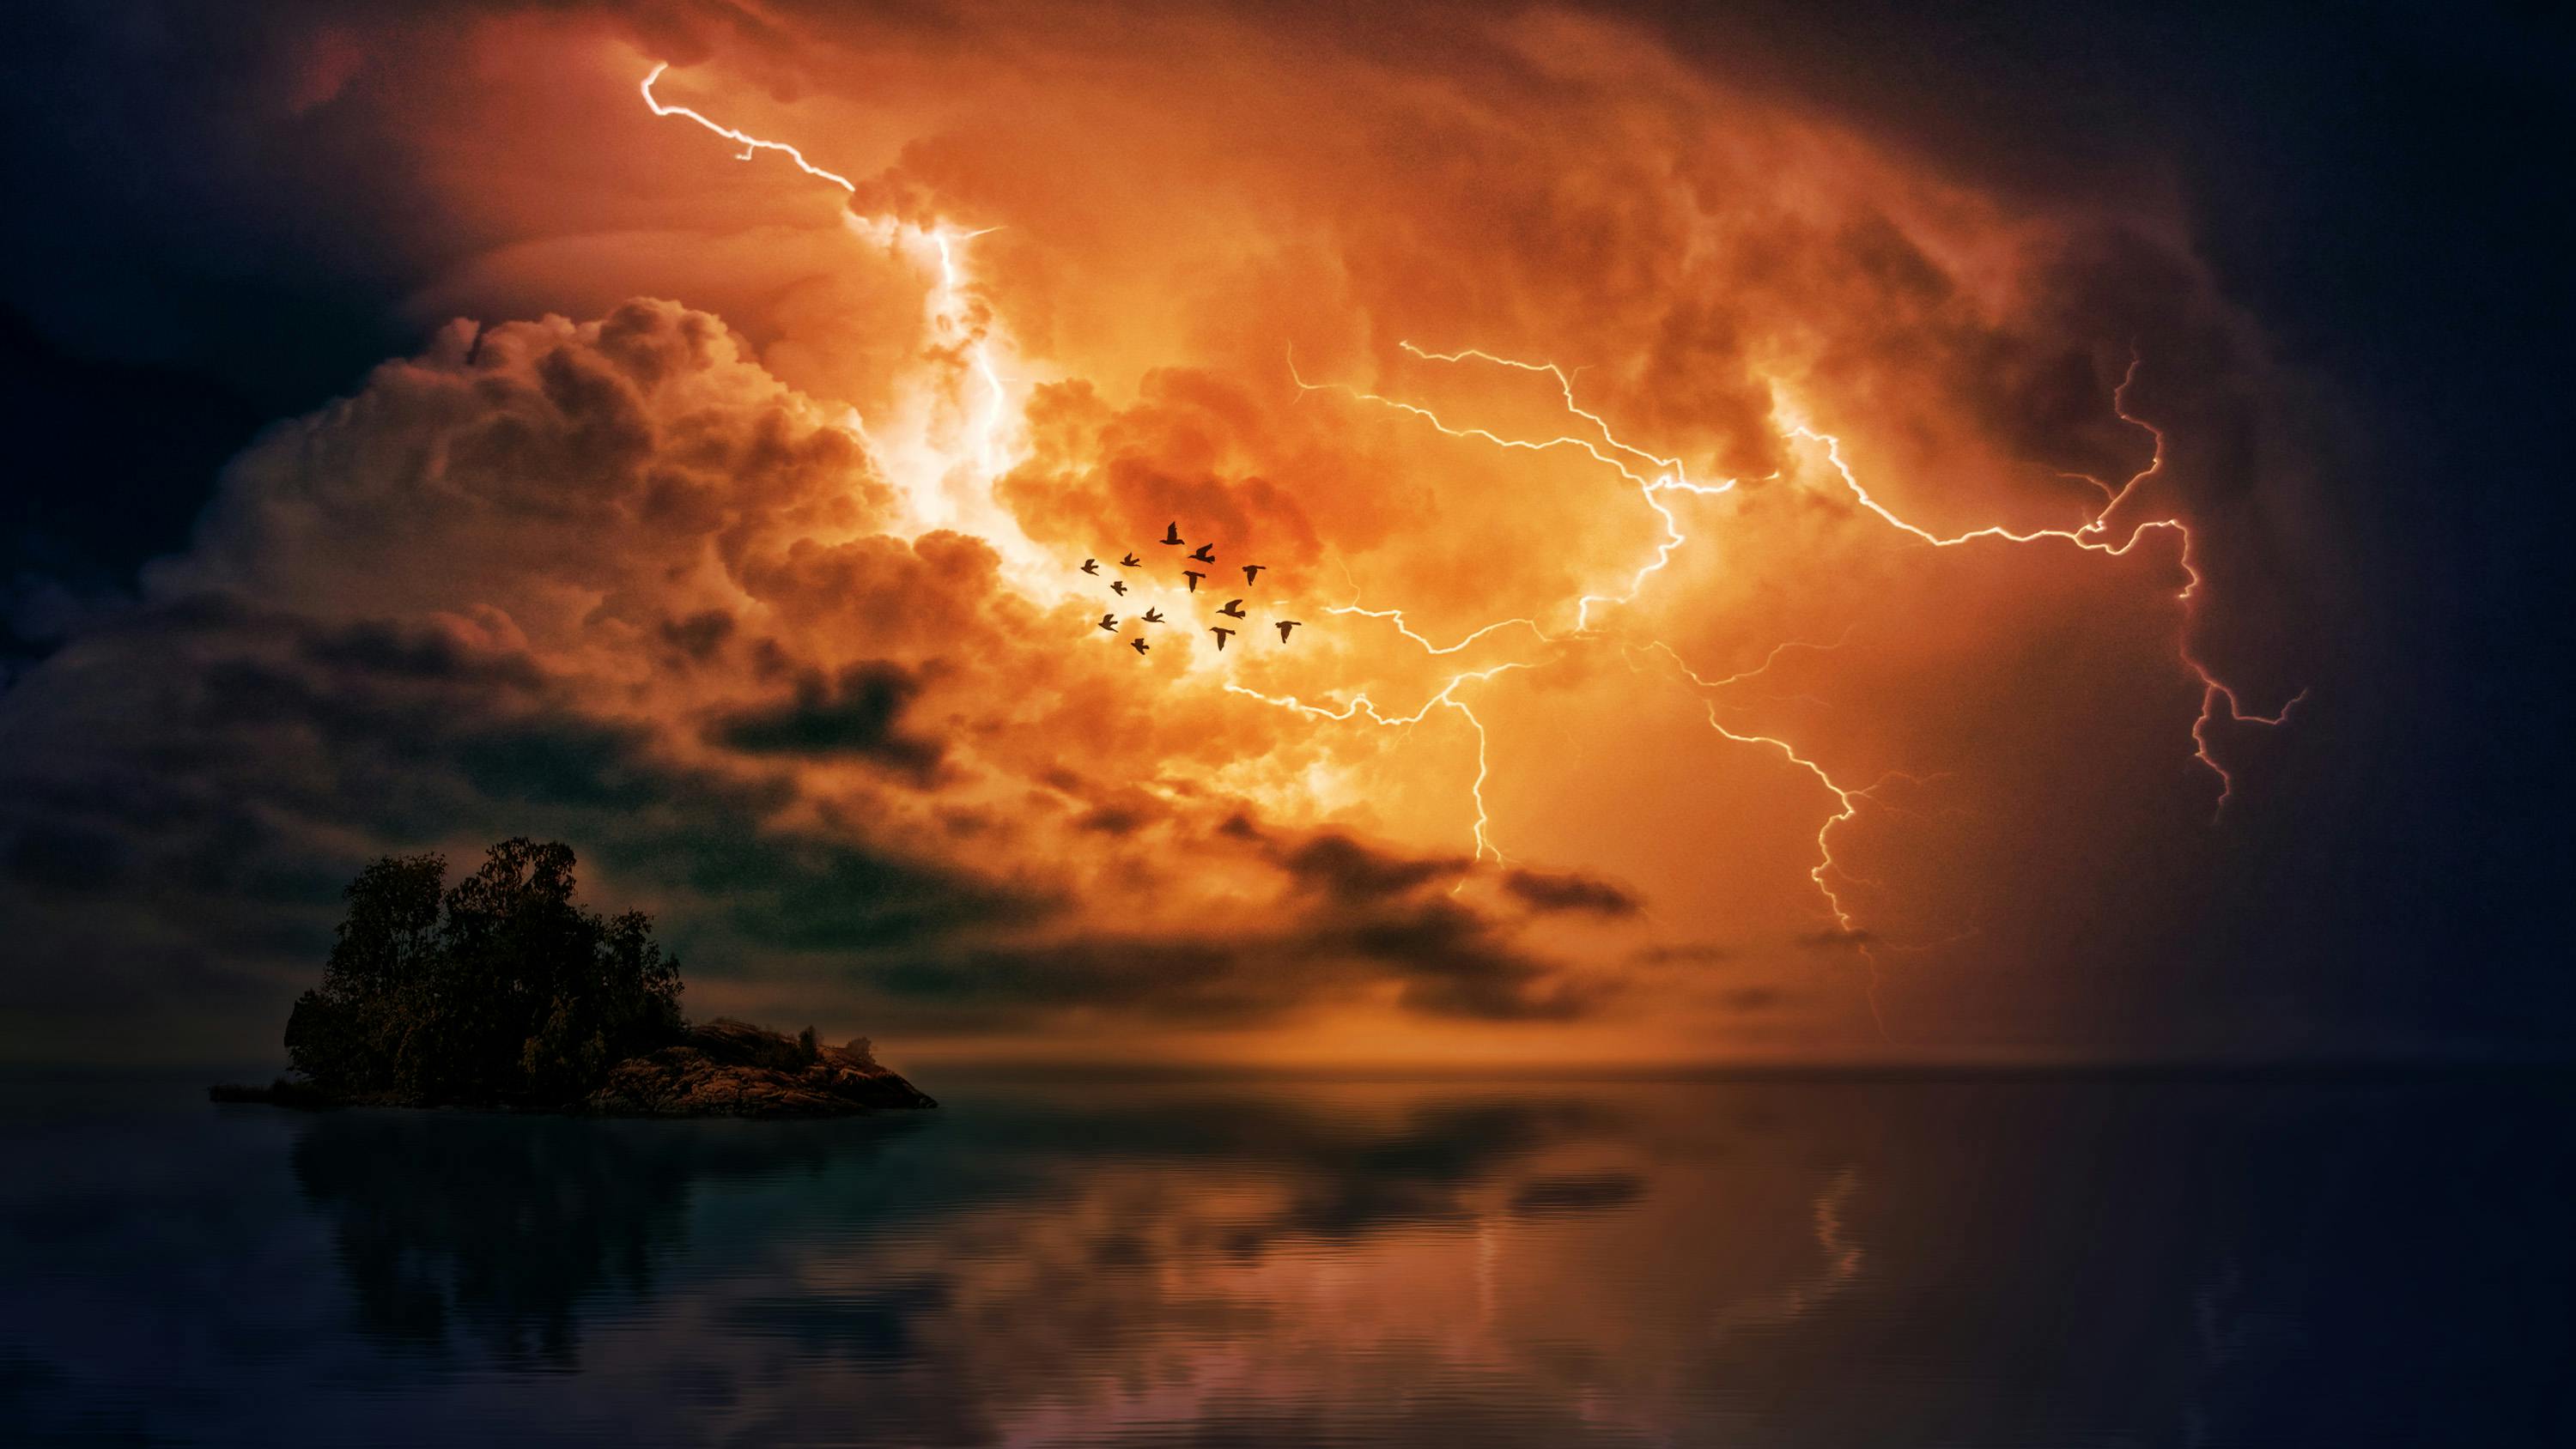 Lightning Photos, Download The BEST Free Lightning Stock Photos & HD Images